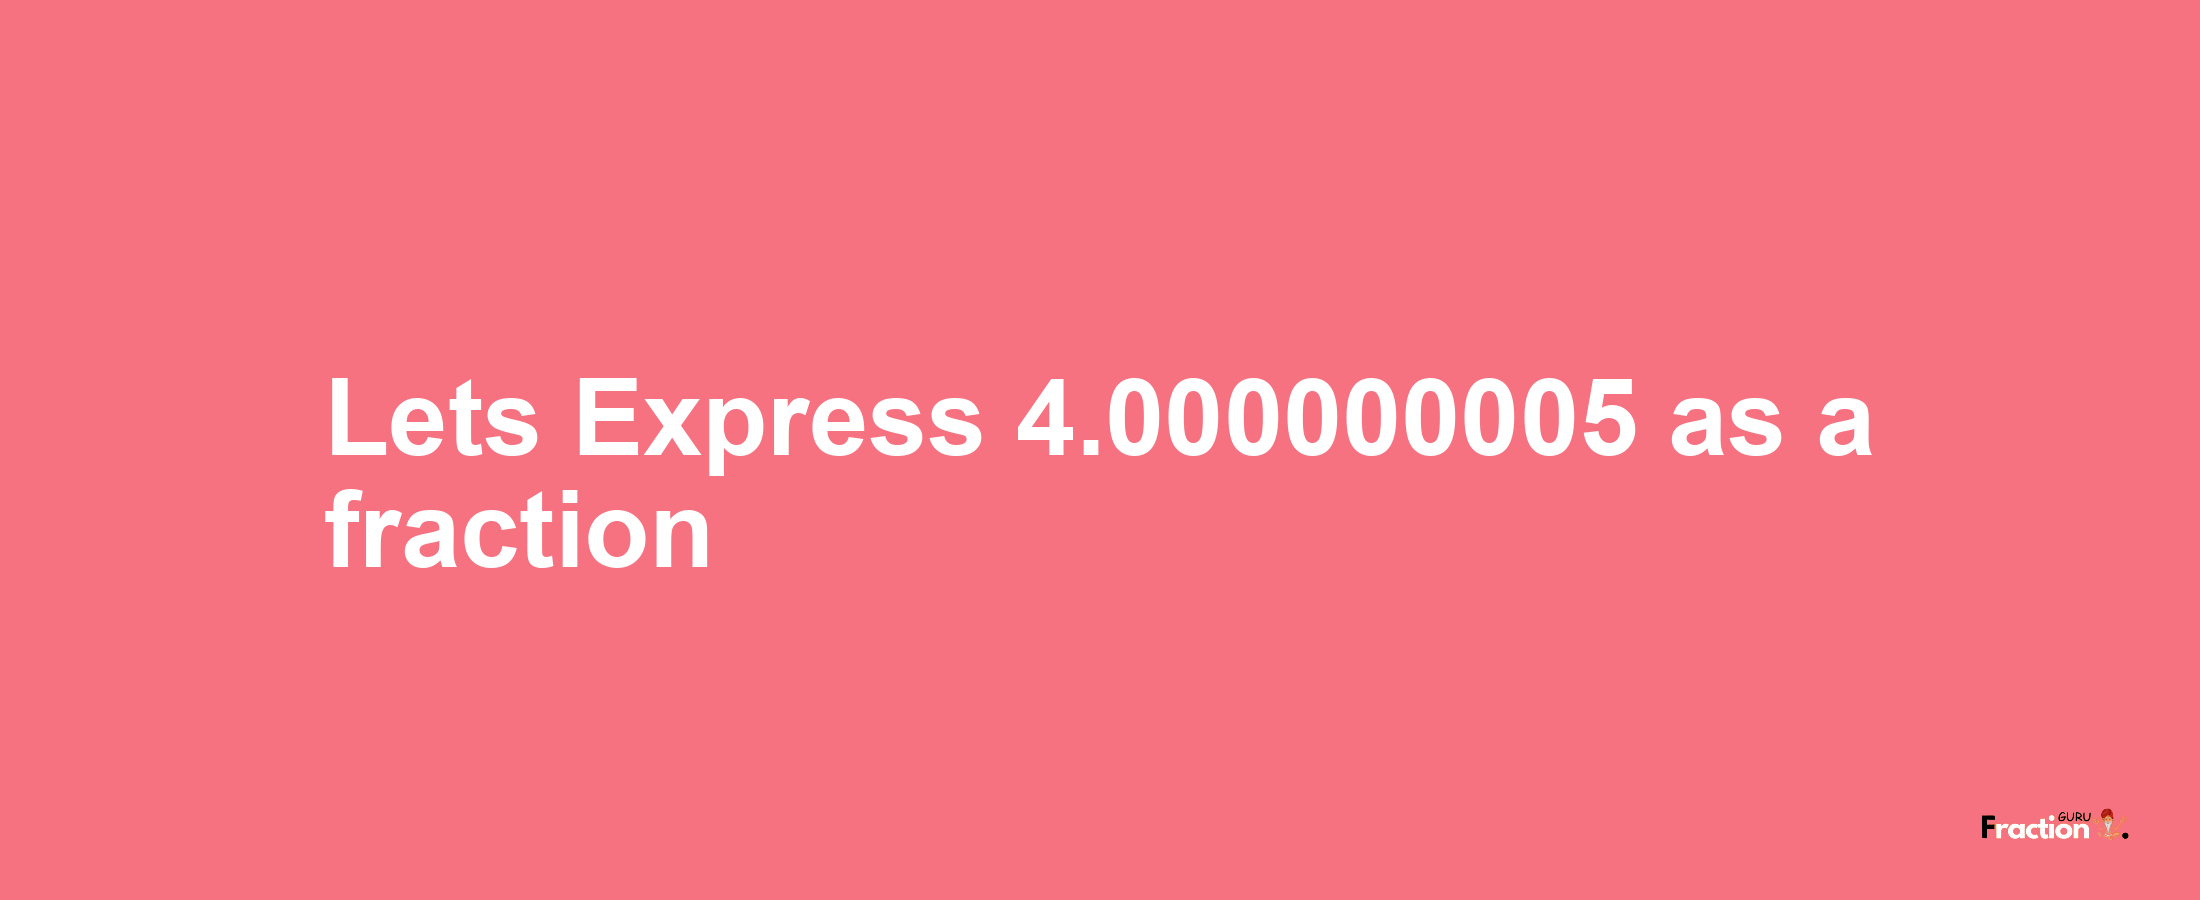 Lets Express 4.000000005 as afraction